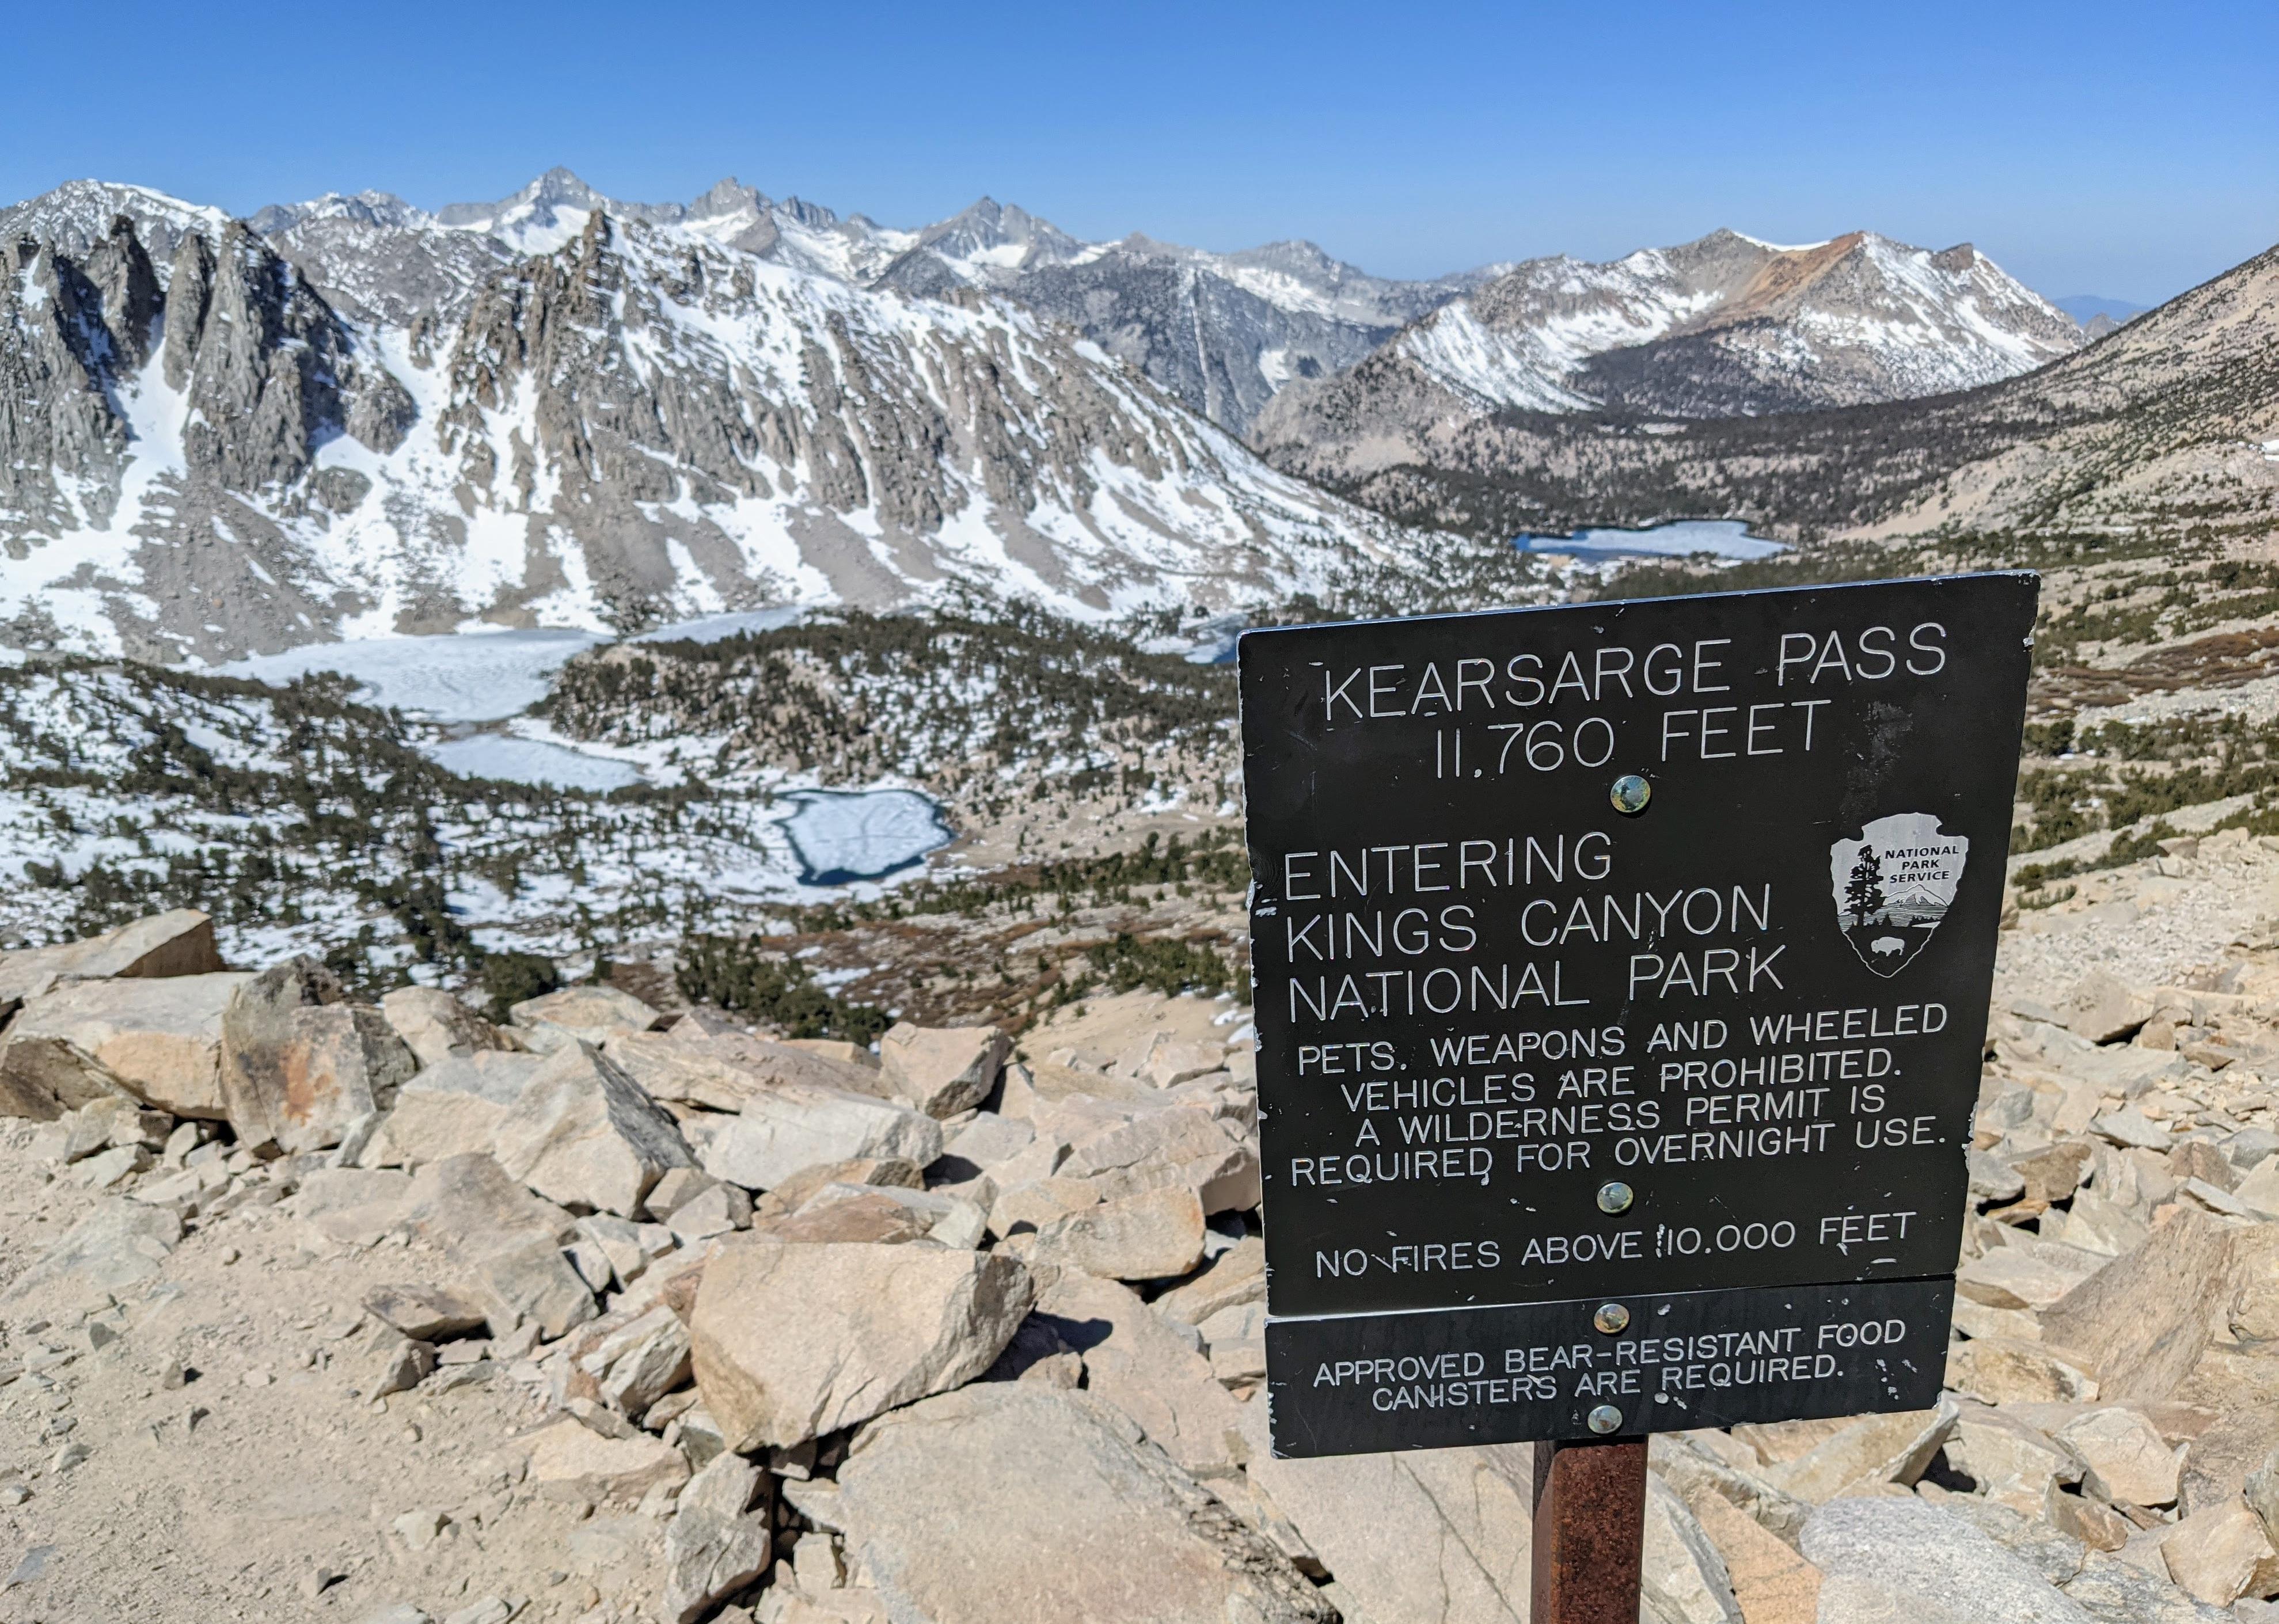 The Kearsarge Pass signpost in Kings Canyon National Park.